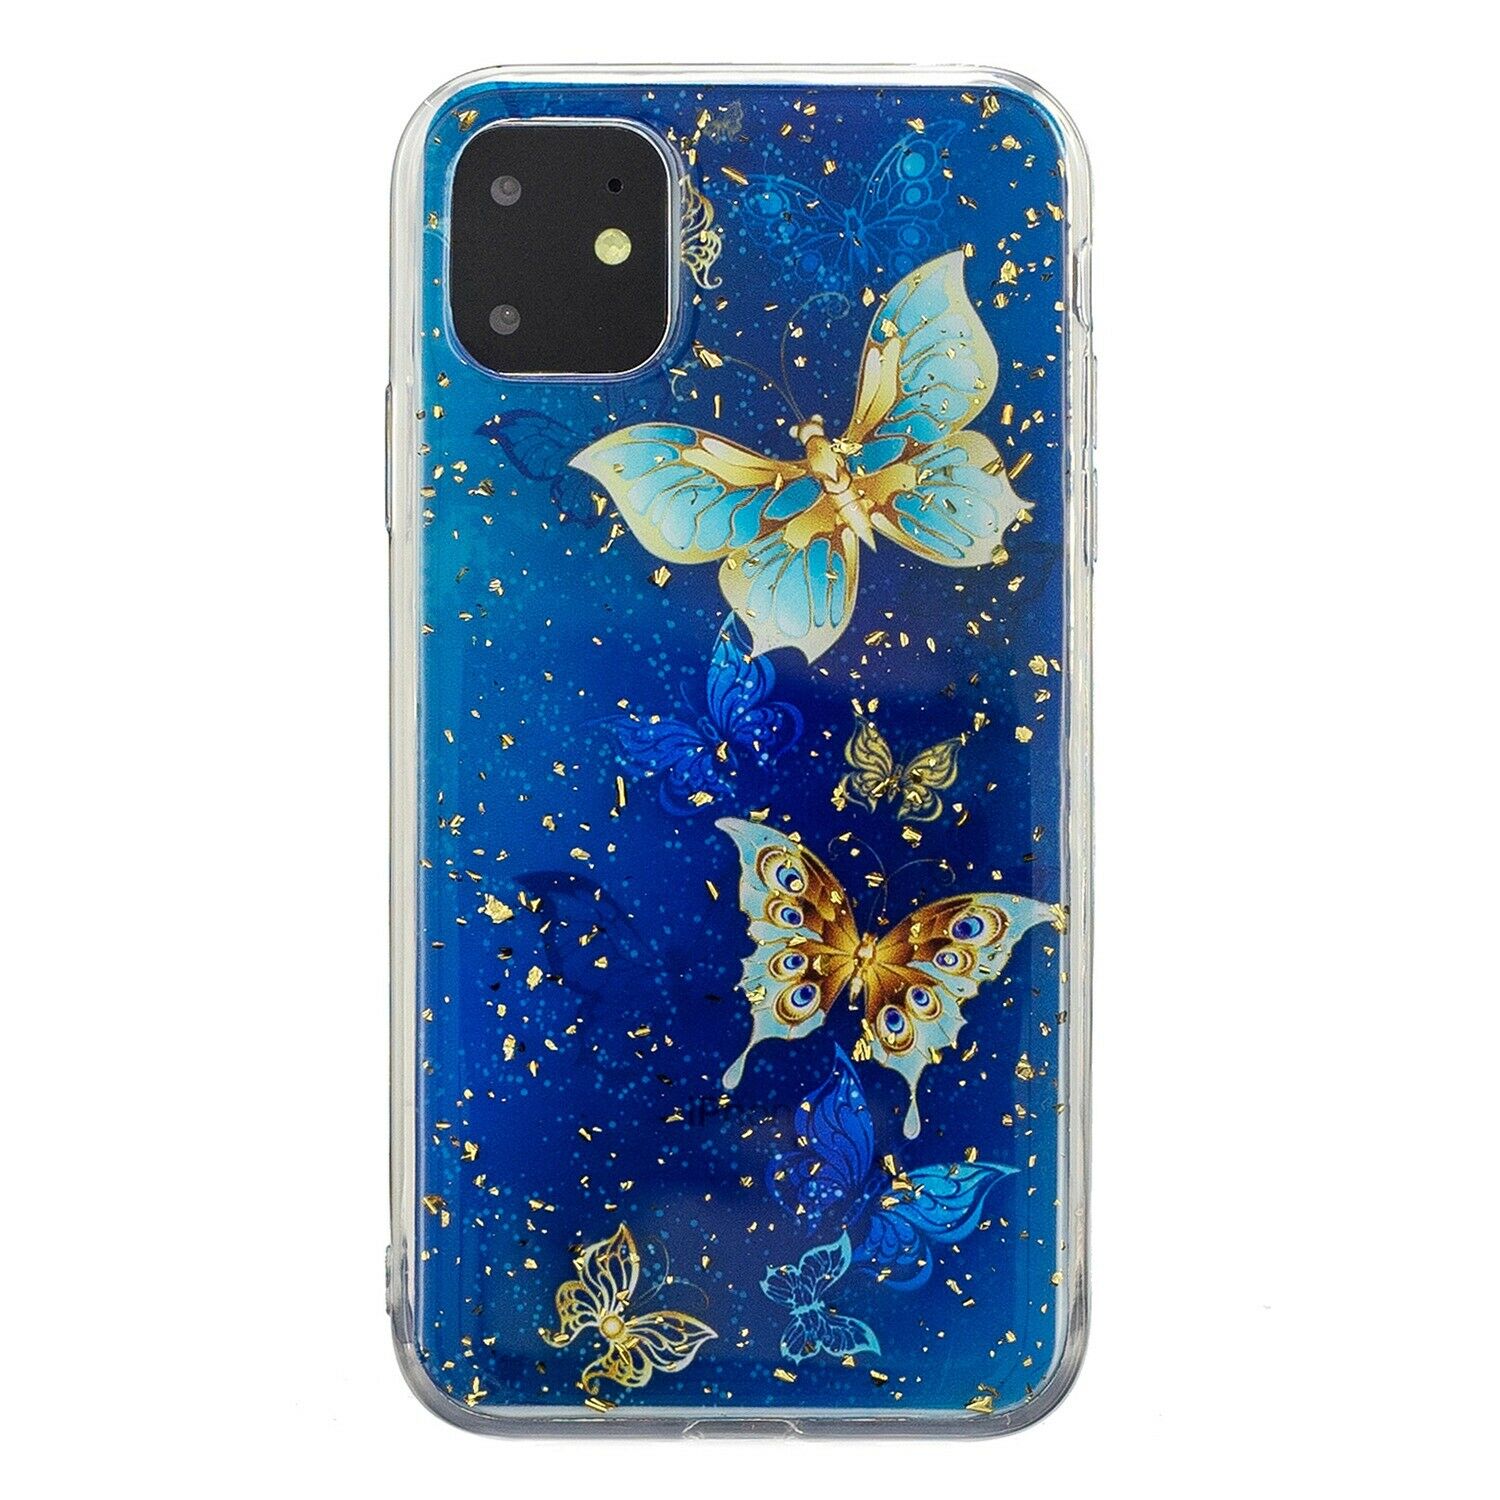 Bling Pattern Glitter Soft Rubber Silicone Back Case For iPhone